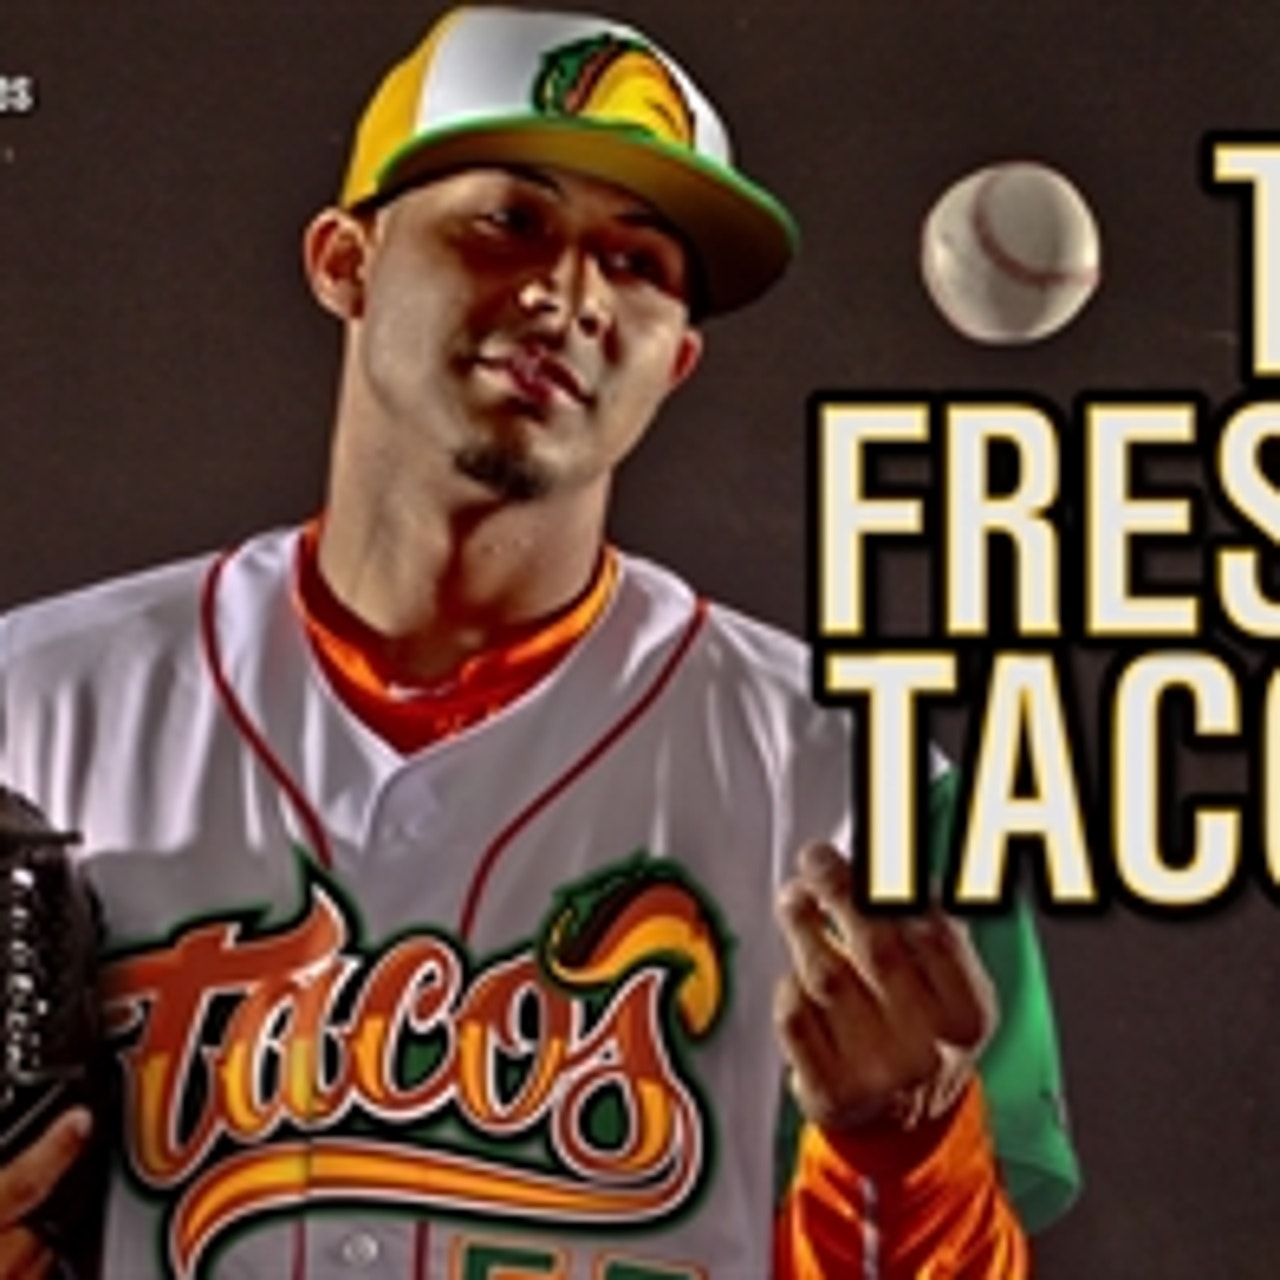 Minor league team to wear 'Tacos' uniforms for a day